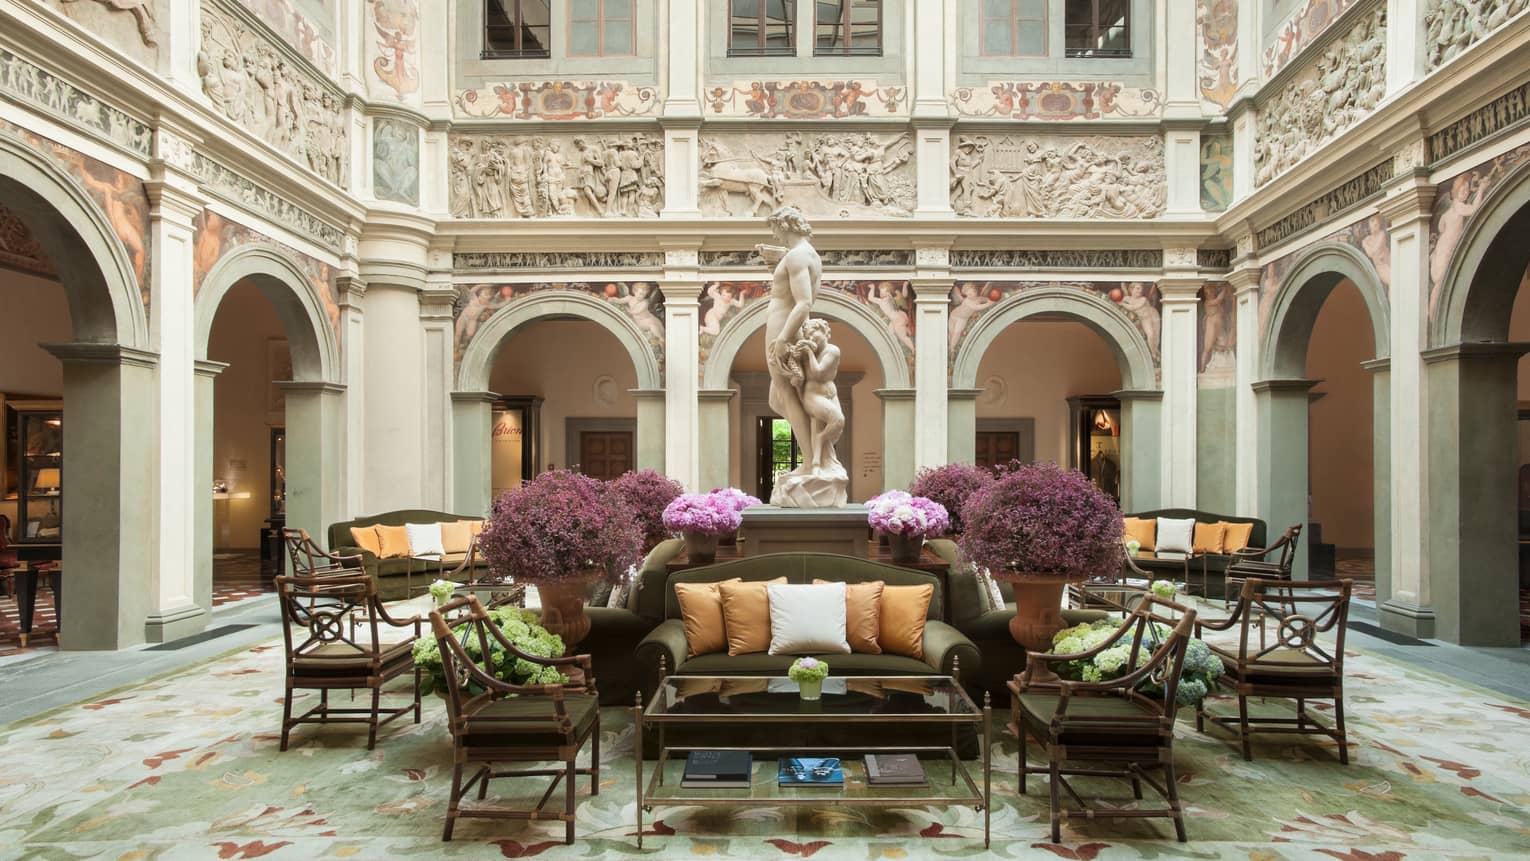 Hotel lobby sofas, chairs under statue, high ceilings and ornate walls